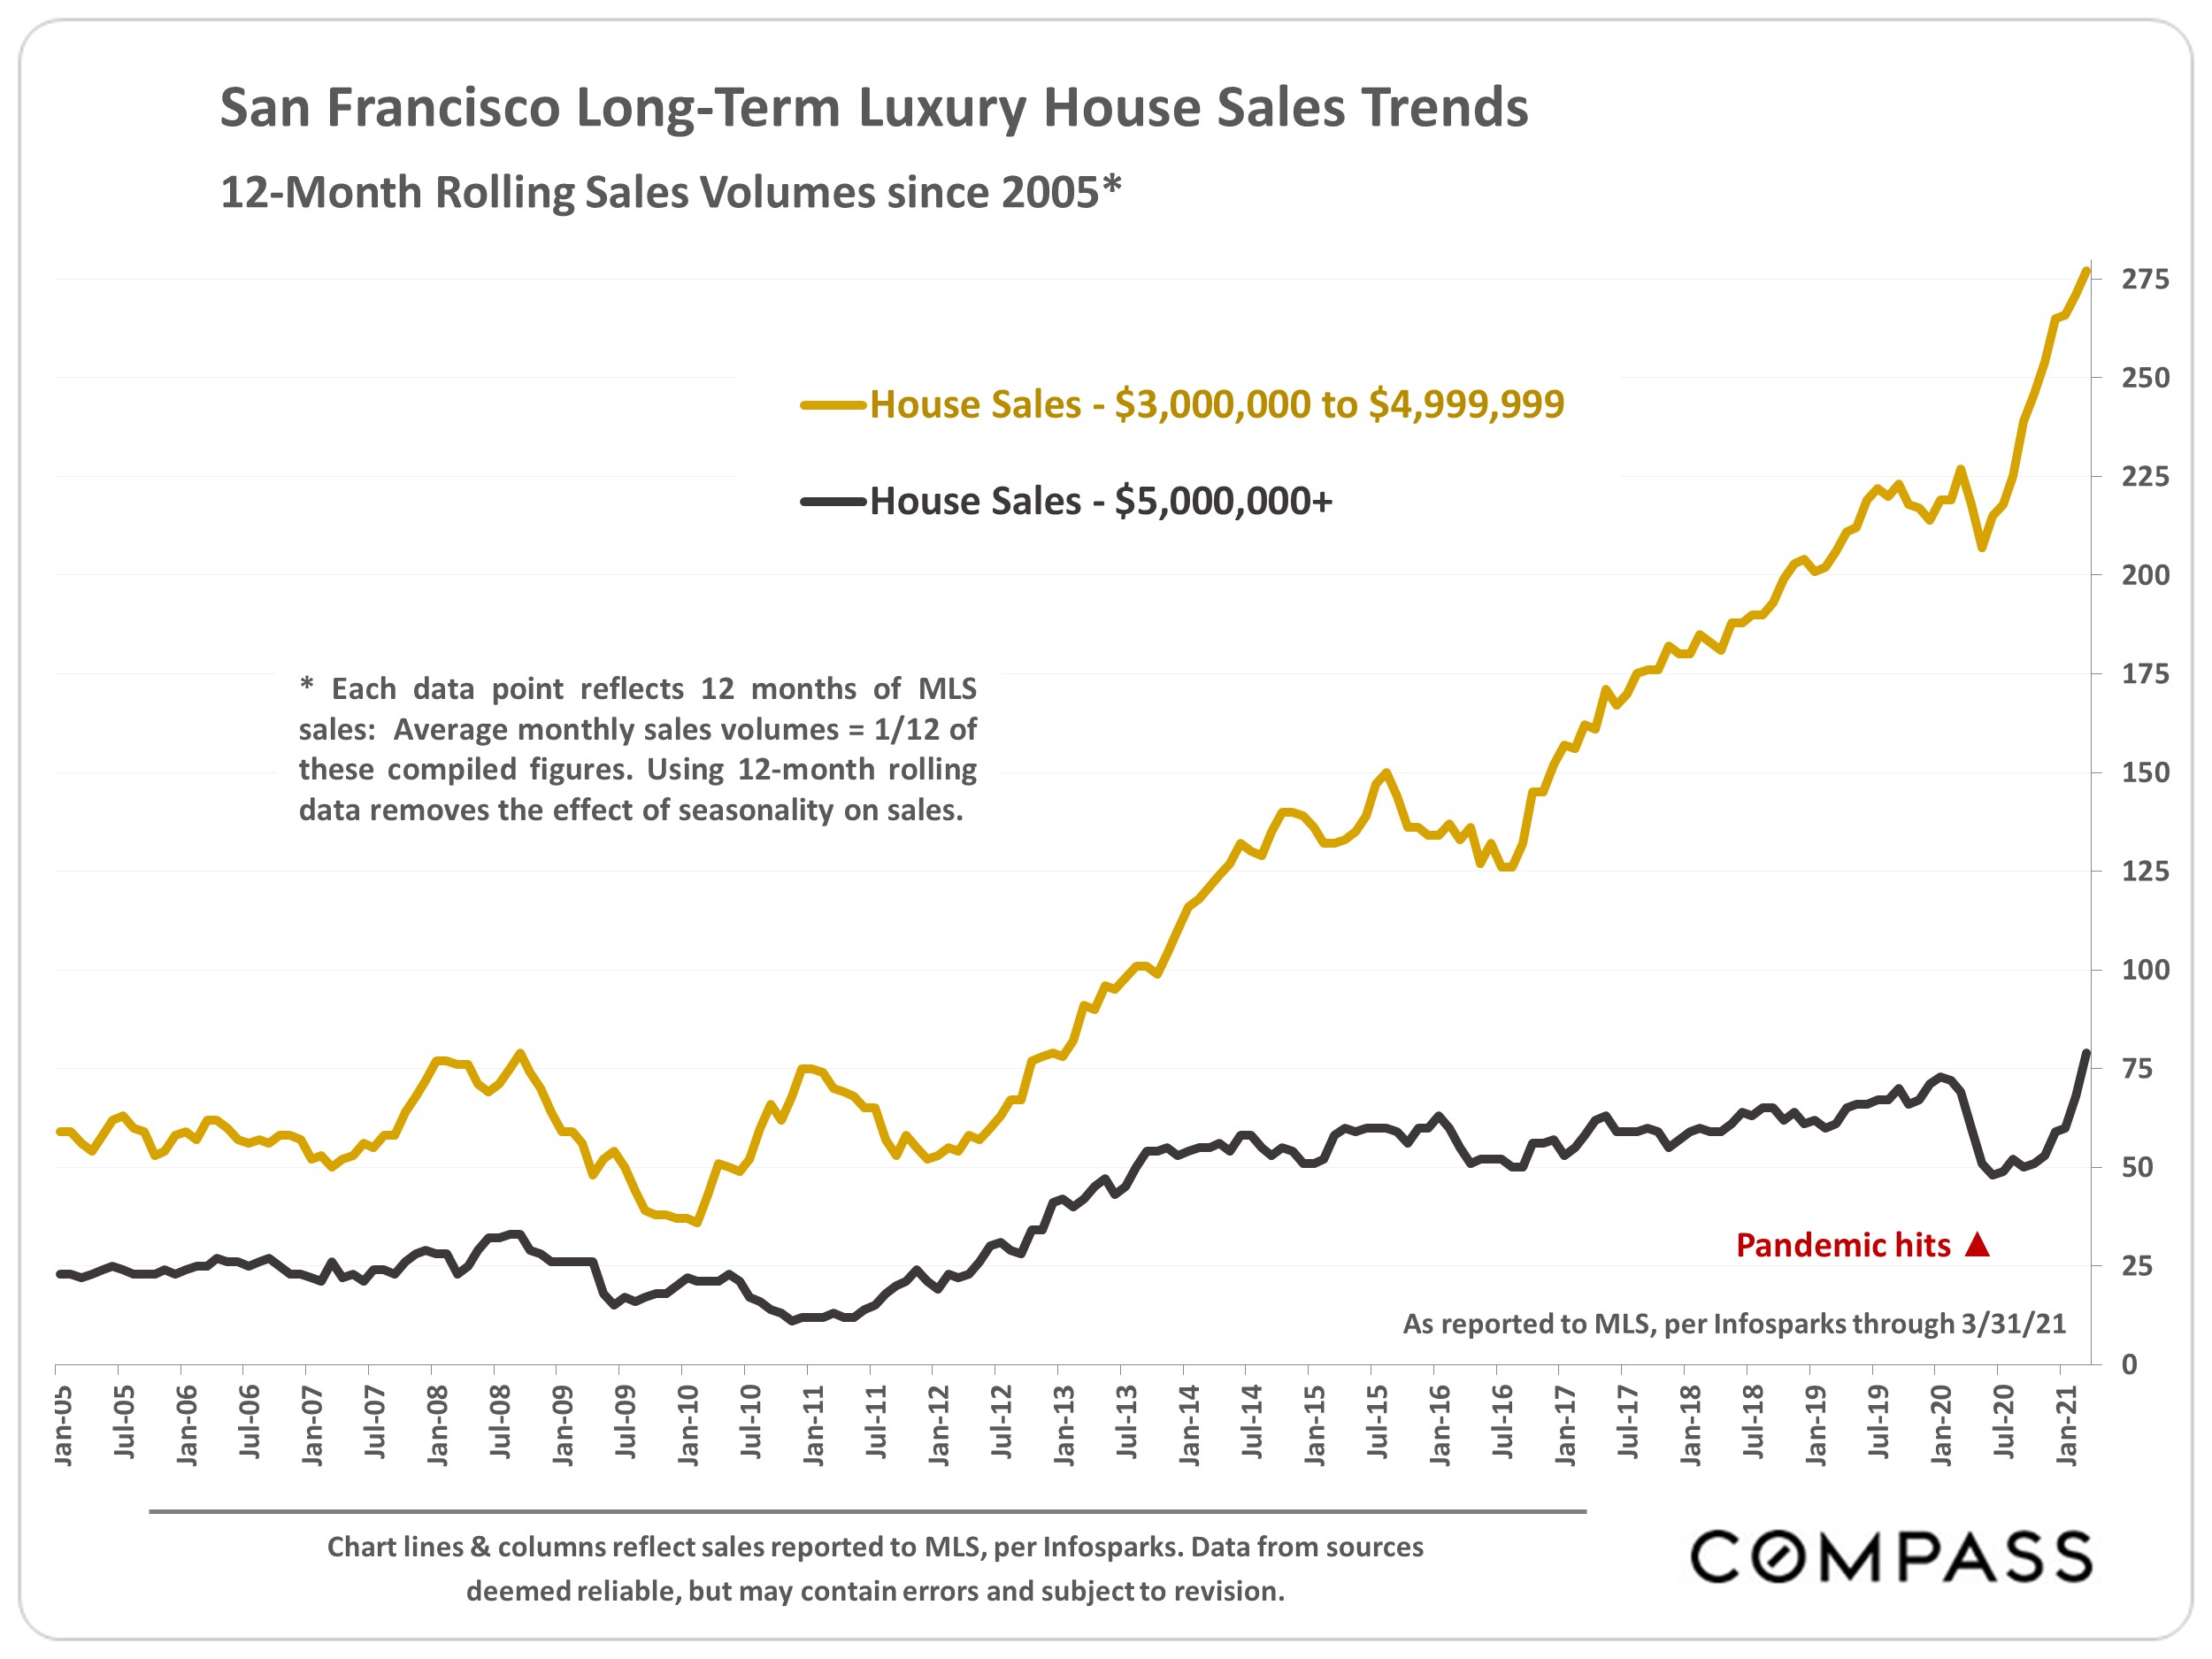 Chart showing the San Francisco Long-Term Luxury House Sales Trends, 12-Month Rolling Sales Volumes since 2005